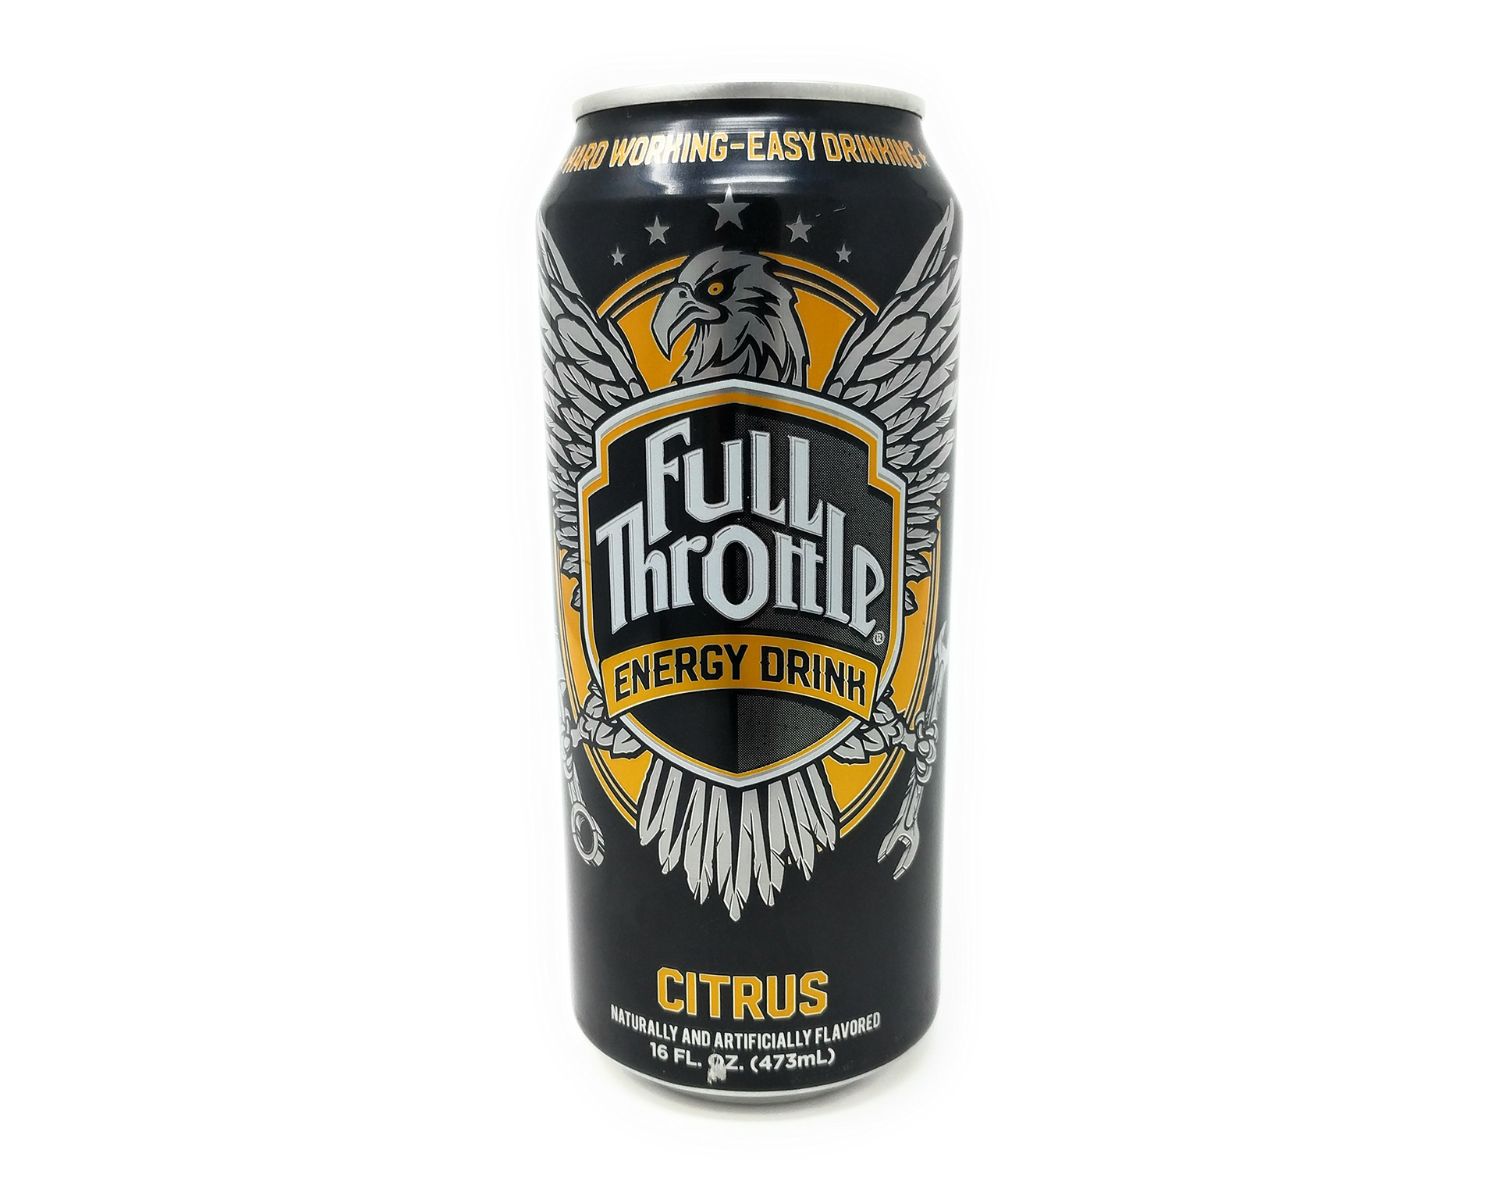 18-full-throttle-energy-drink-nutrition-facts